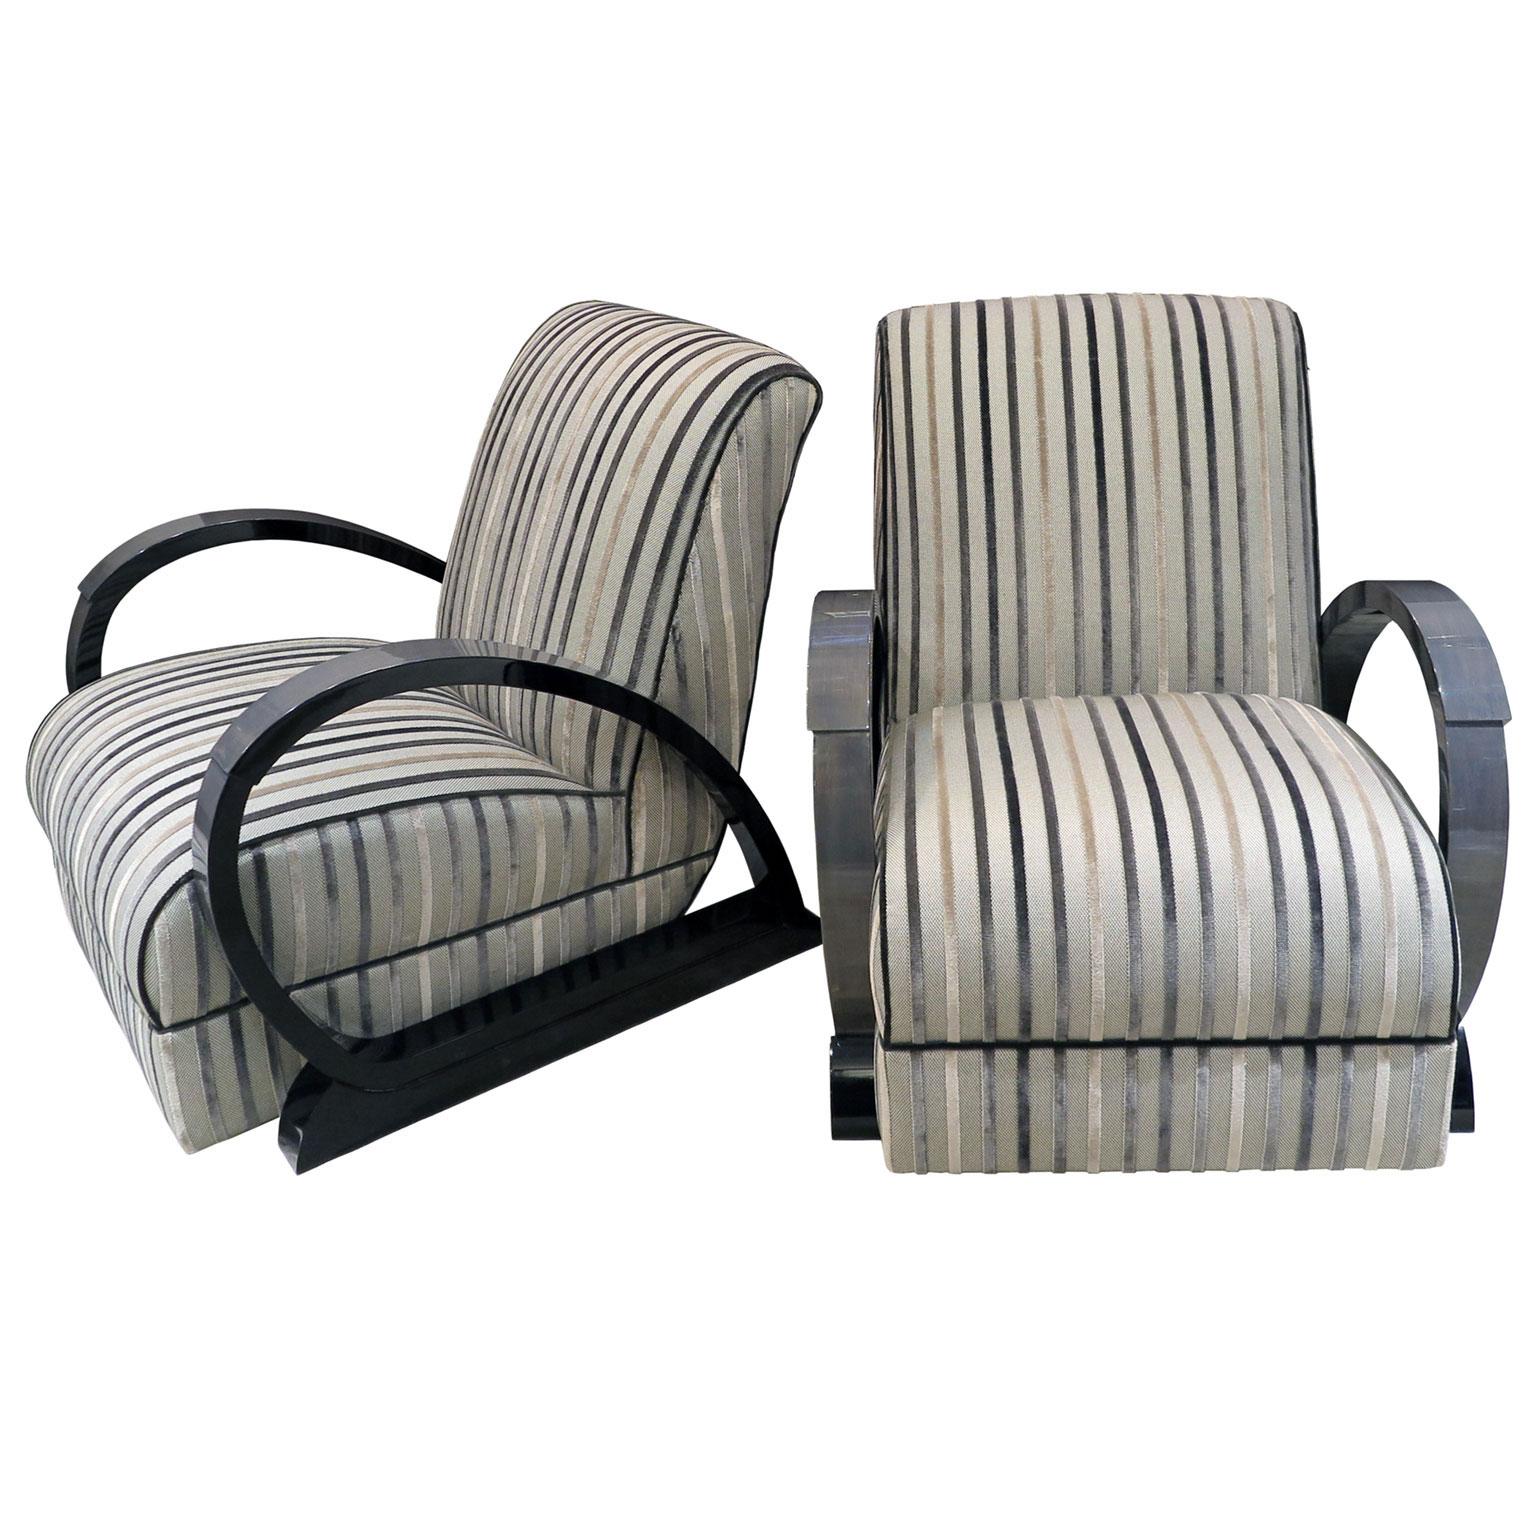 Pair of Art Deco Style Lounge Chairs in Grey Maple with Black Lacquer 1